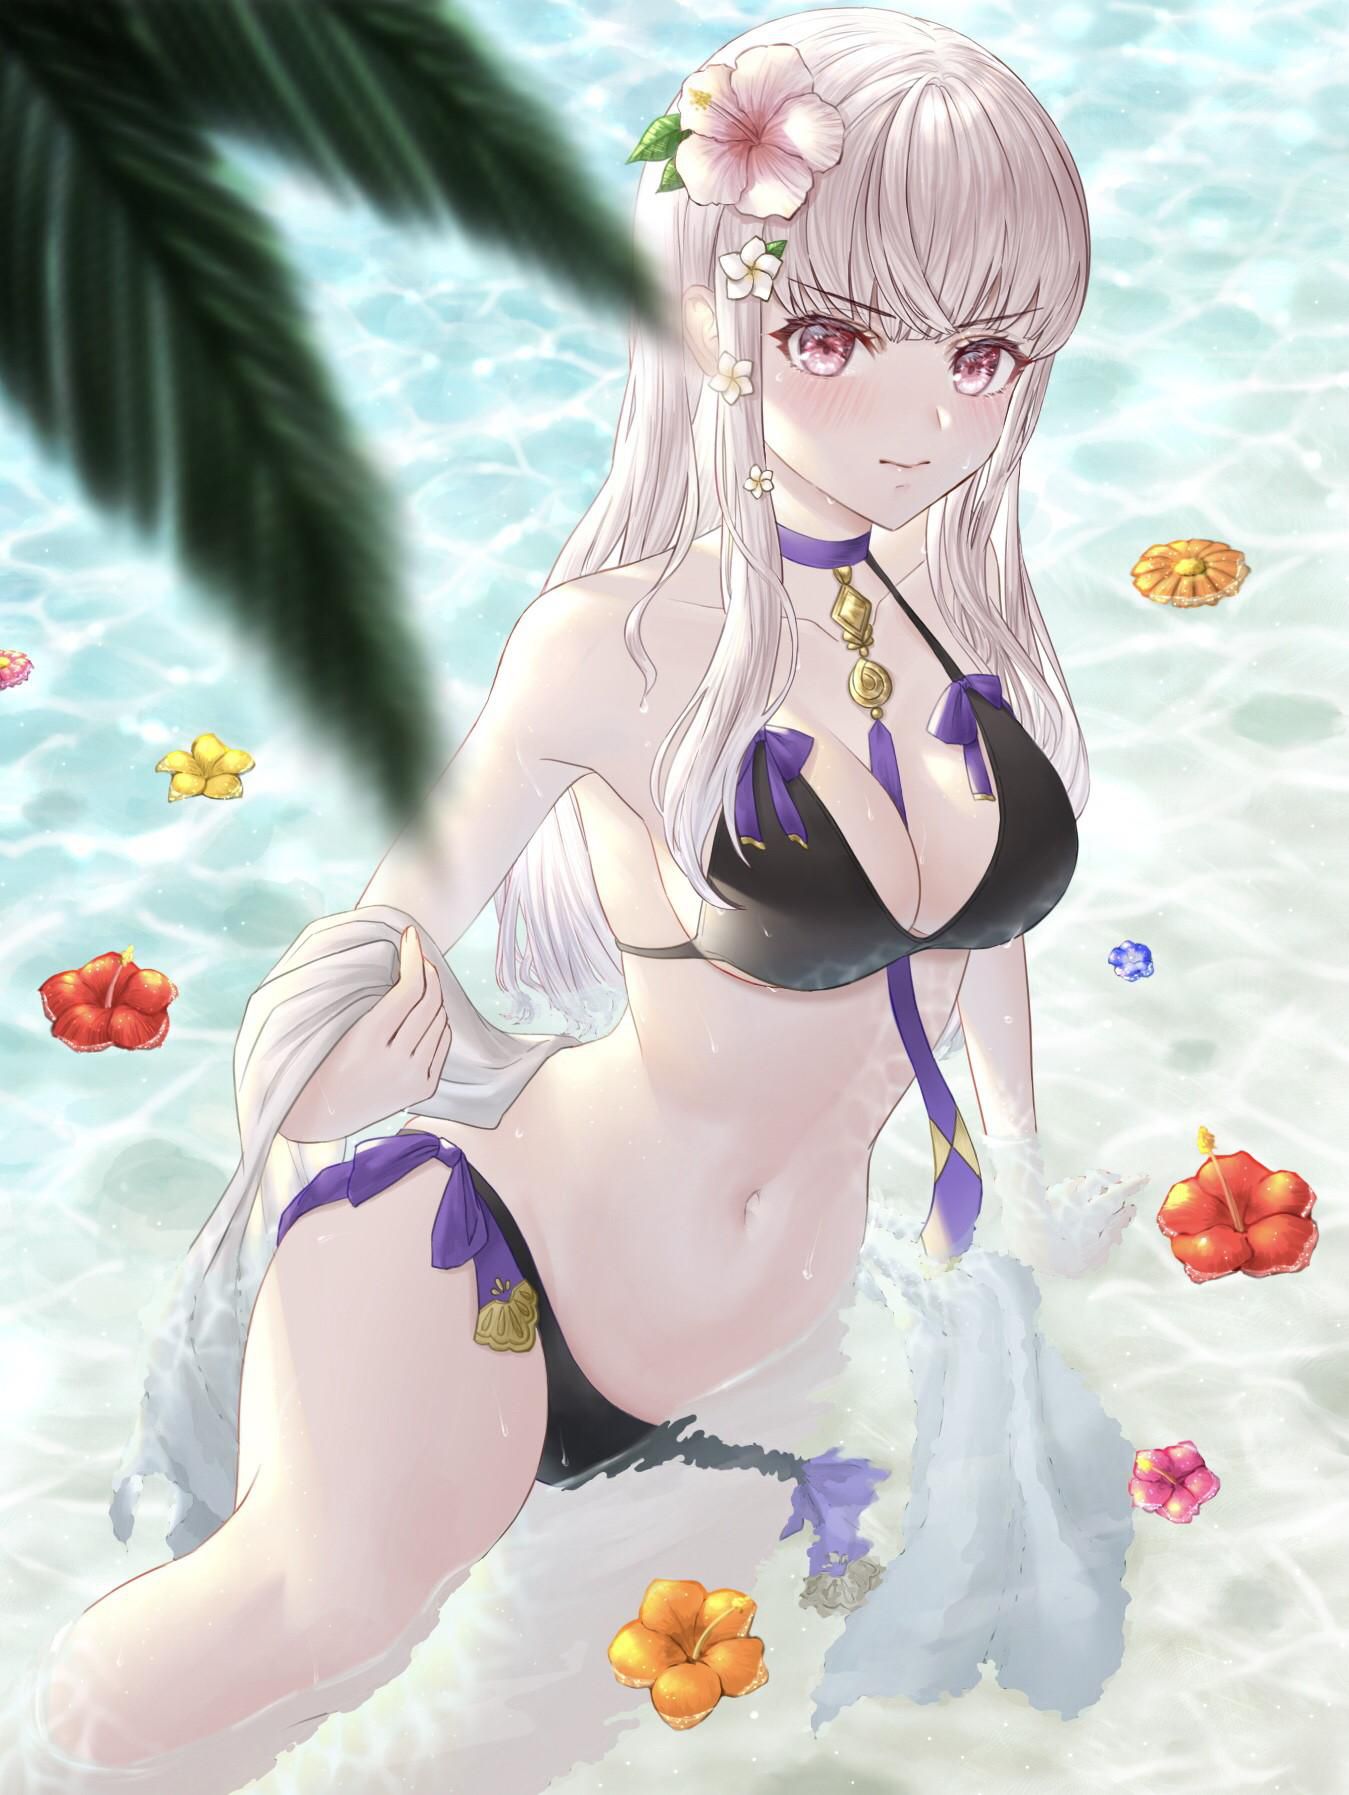 Gather those who want to nudge with the erotic images of Fire Emblem! 5